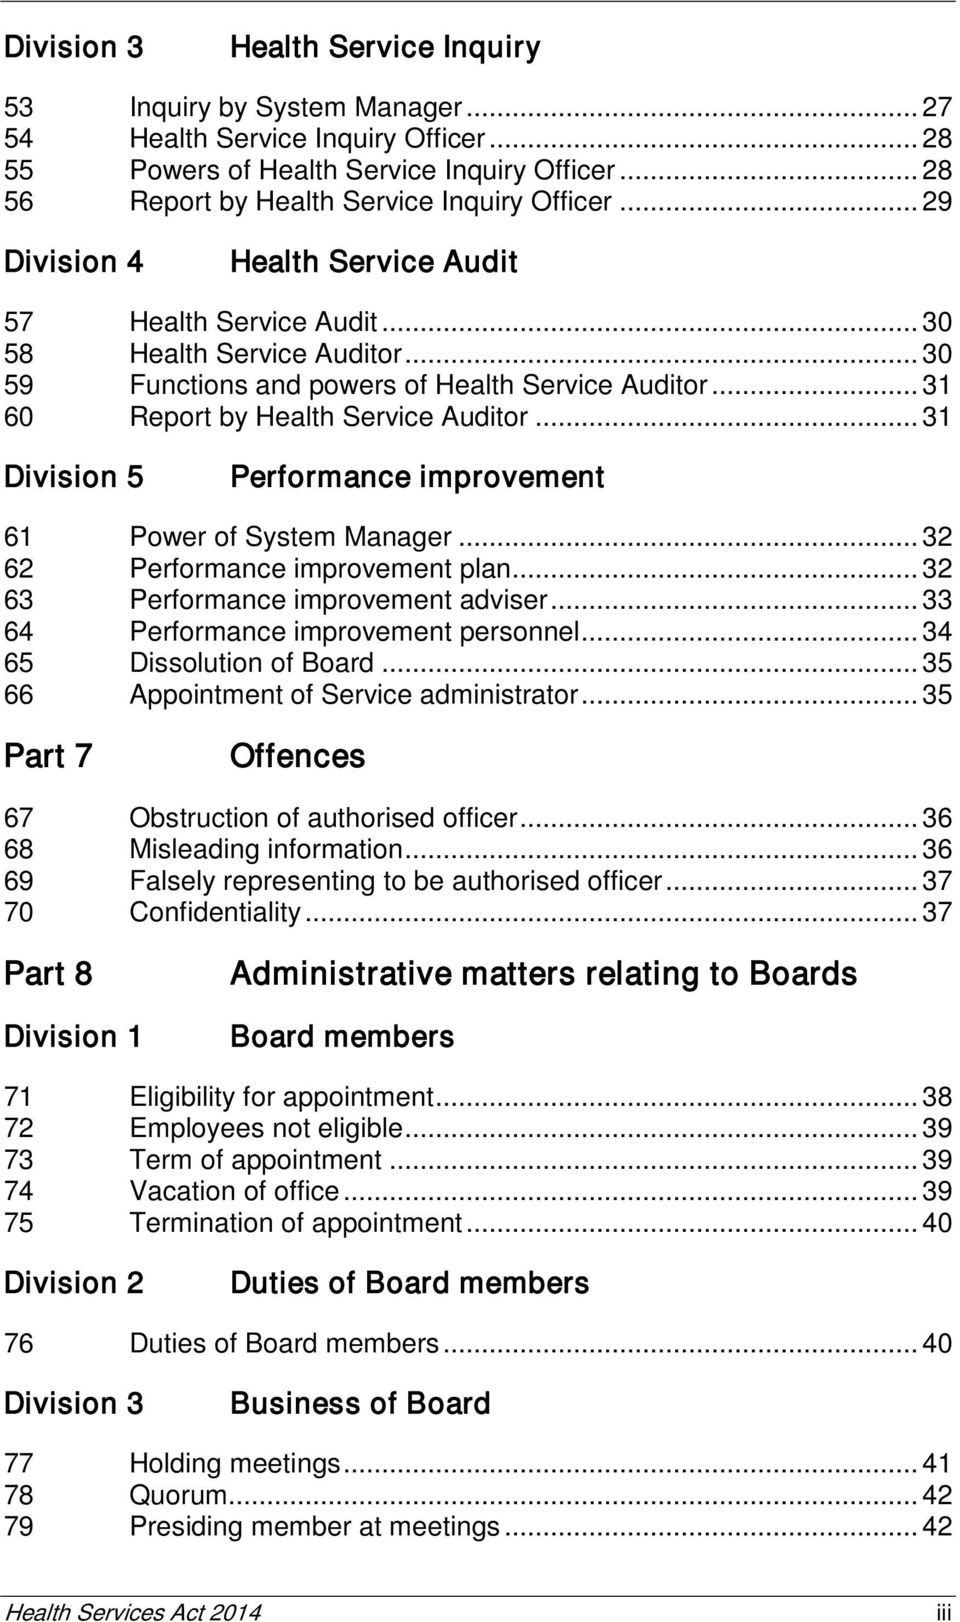 .. 31 60 Report by Health Service Auditor... 31 Division 5 Performance improvement 61 Power of System Manager... 32 62 Performance improvement plan... 32 63 Performance improvement adviser.